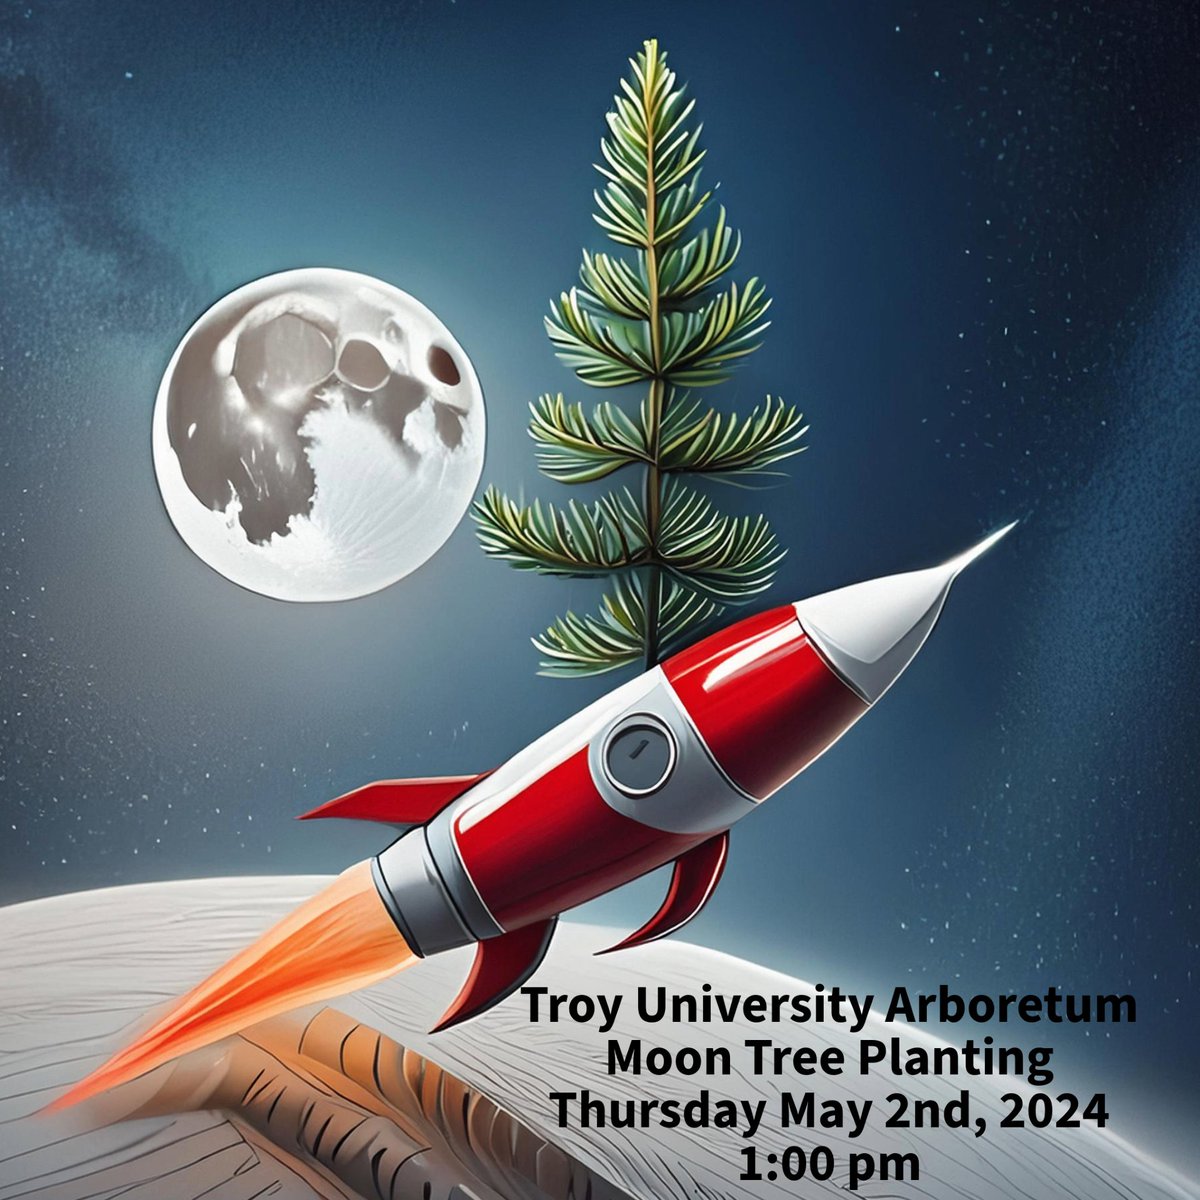 All are invited for the planting of the Moon Tree Thursday May 2 at 1 pm at the Troy University Arboretum.